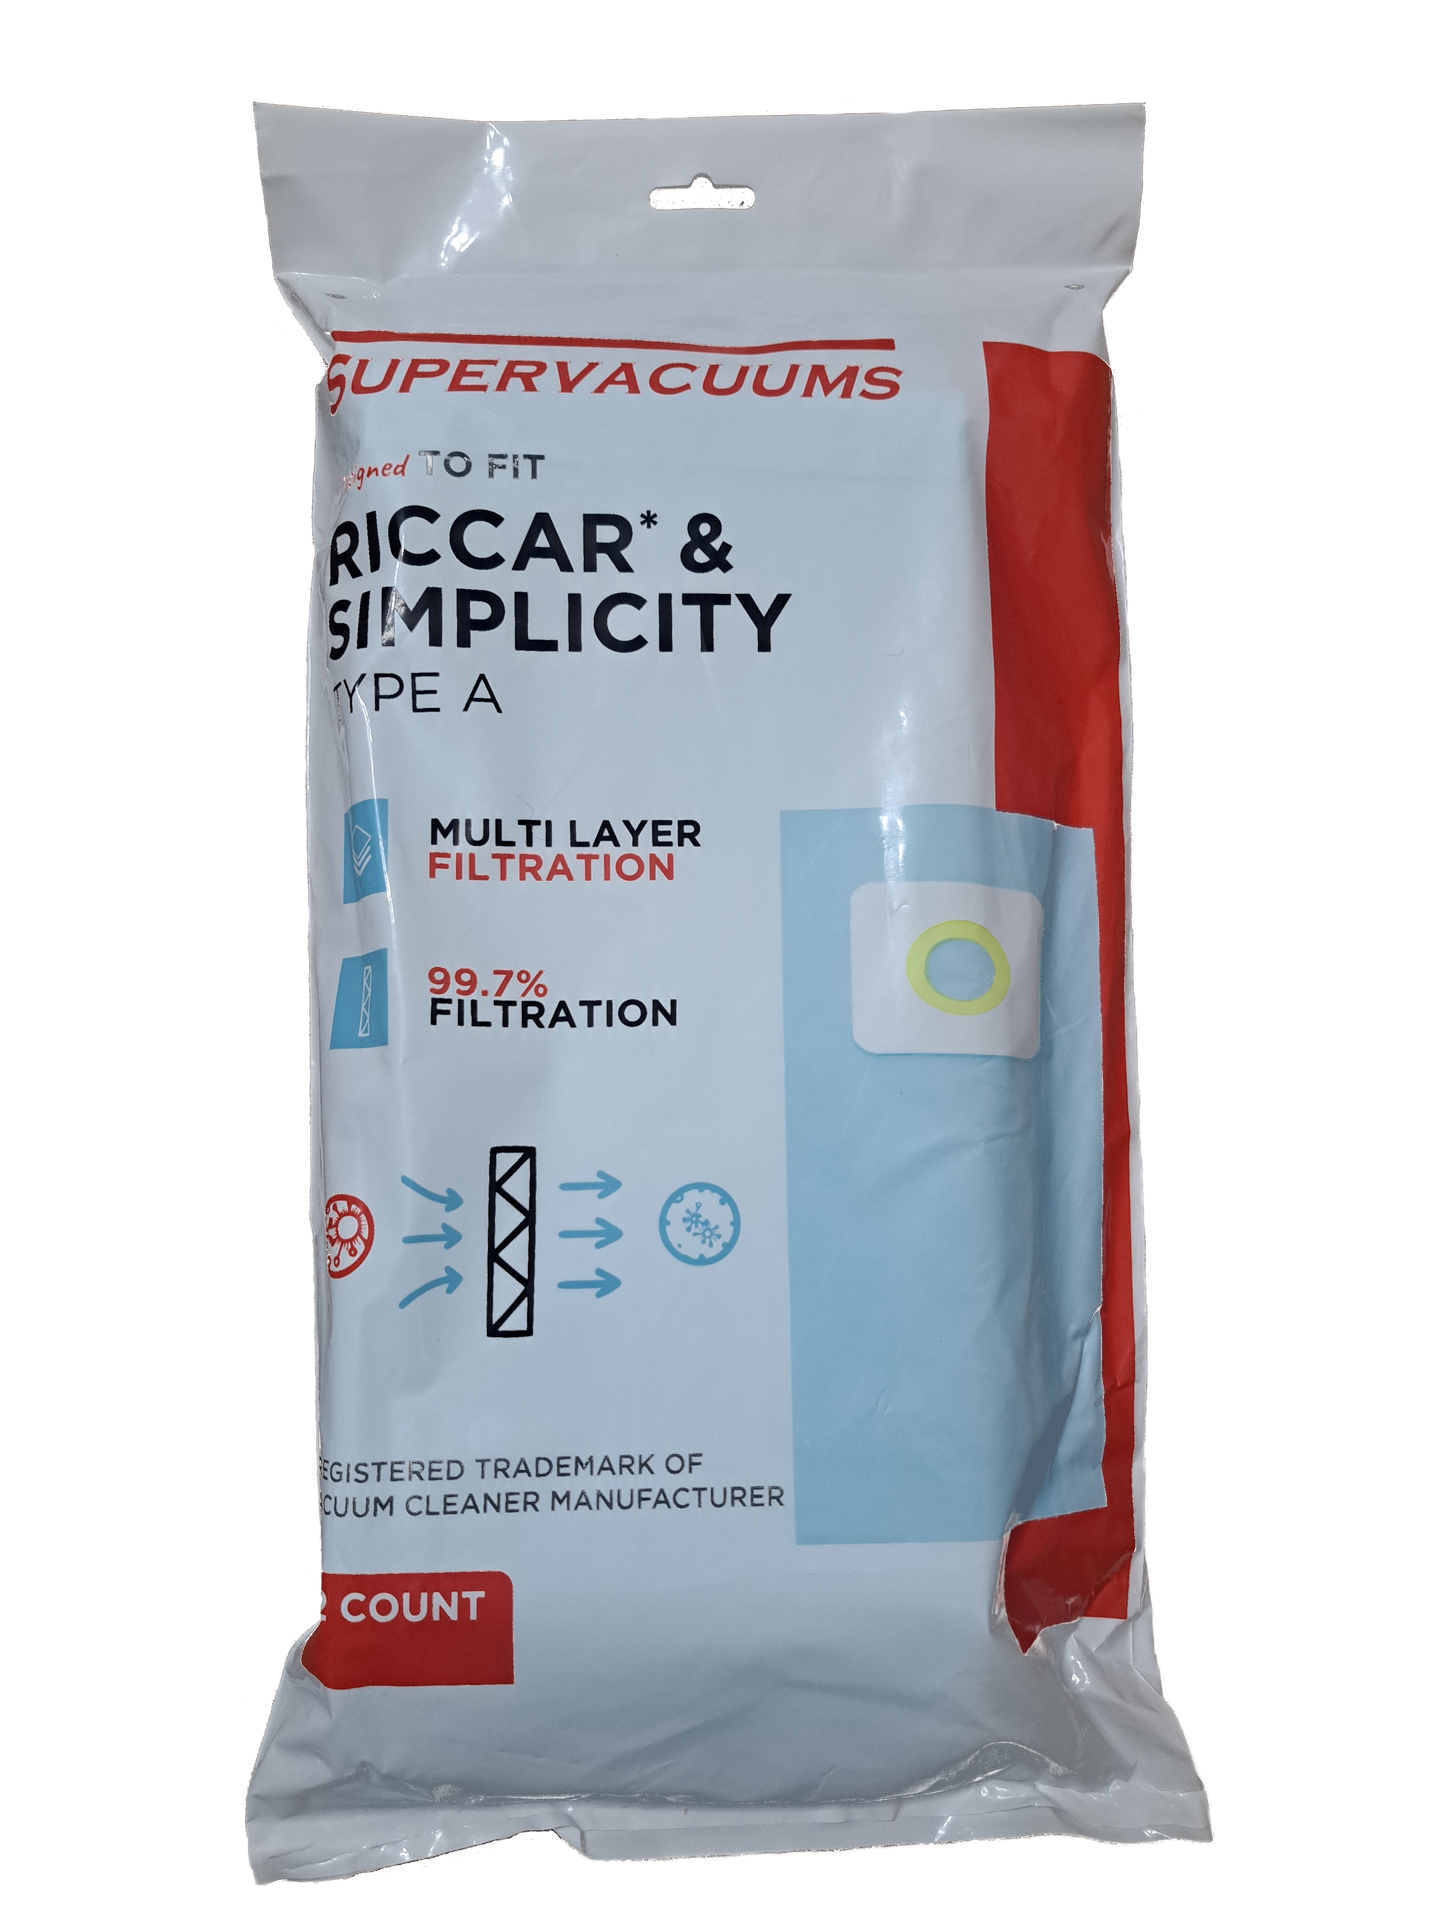 Supervacuums Paper Vacuum Bags for Riccar Type A Vacuum Cleaners - 12 Pack